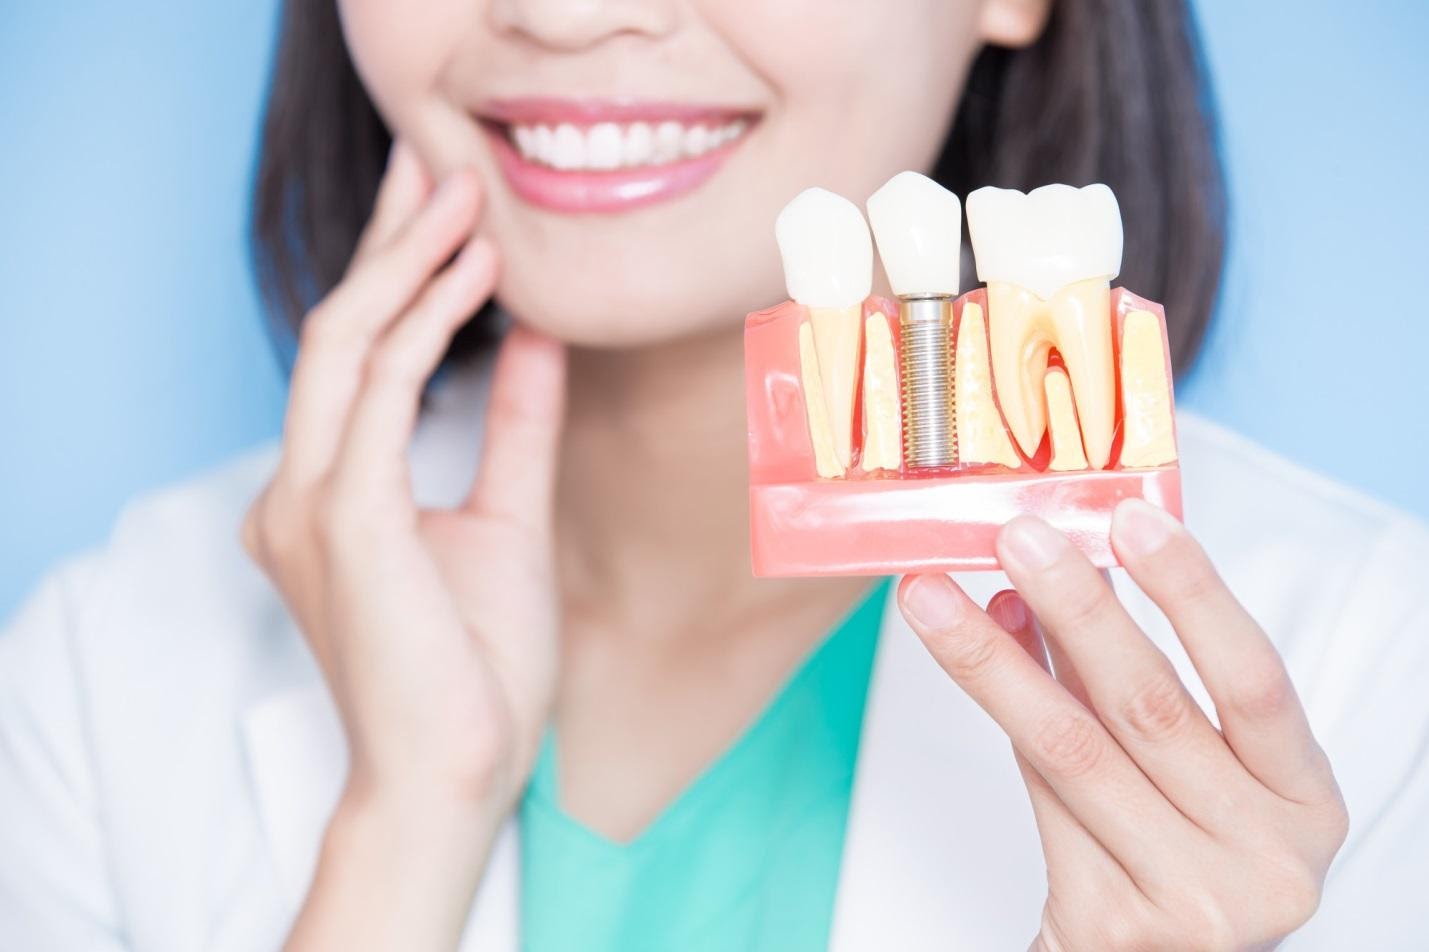 How to Replace a Missing Tooth: The Options Explained